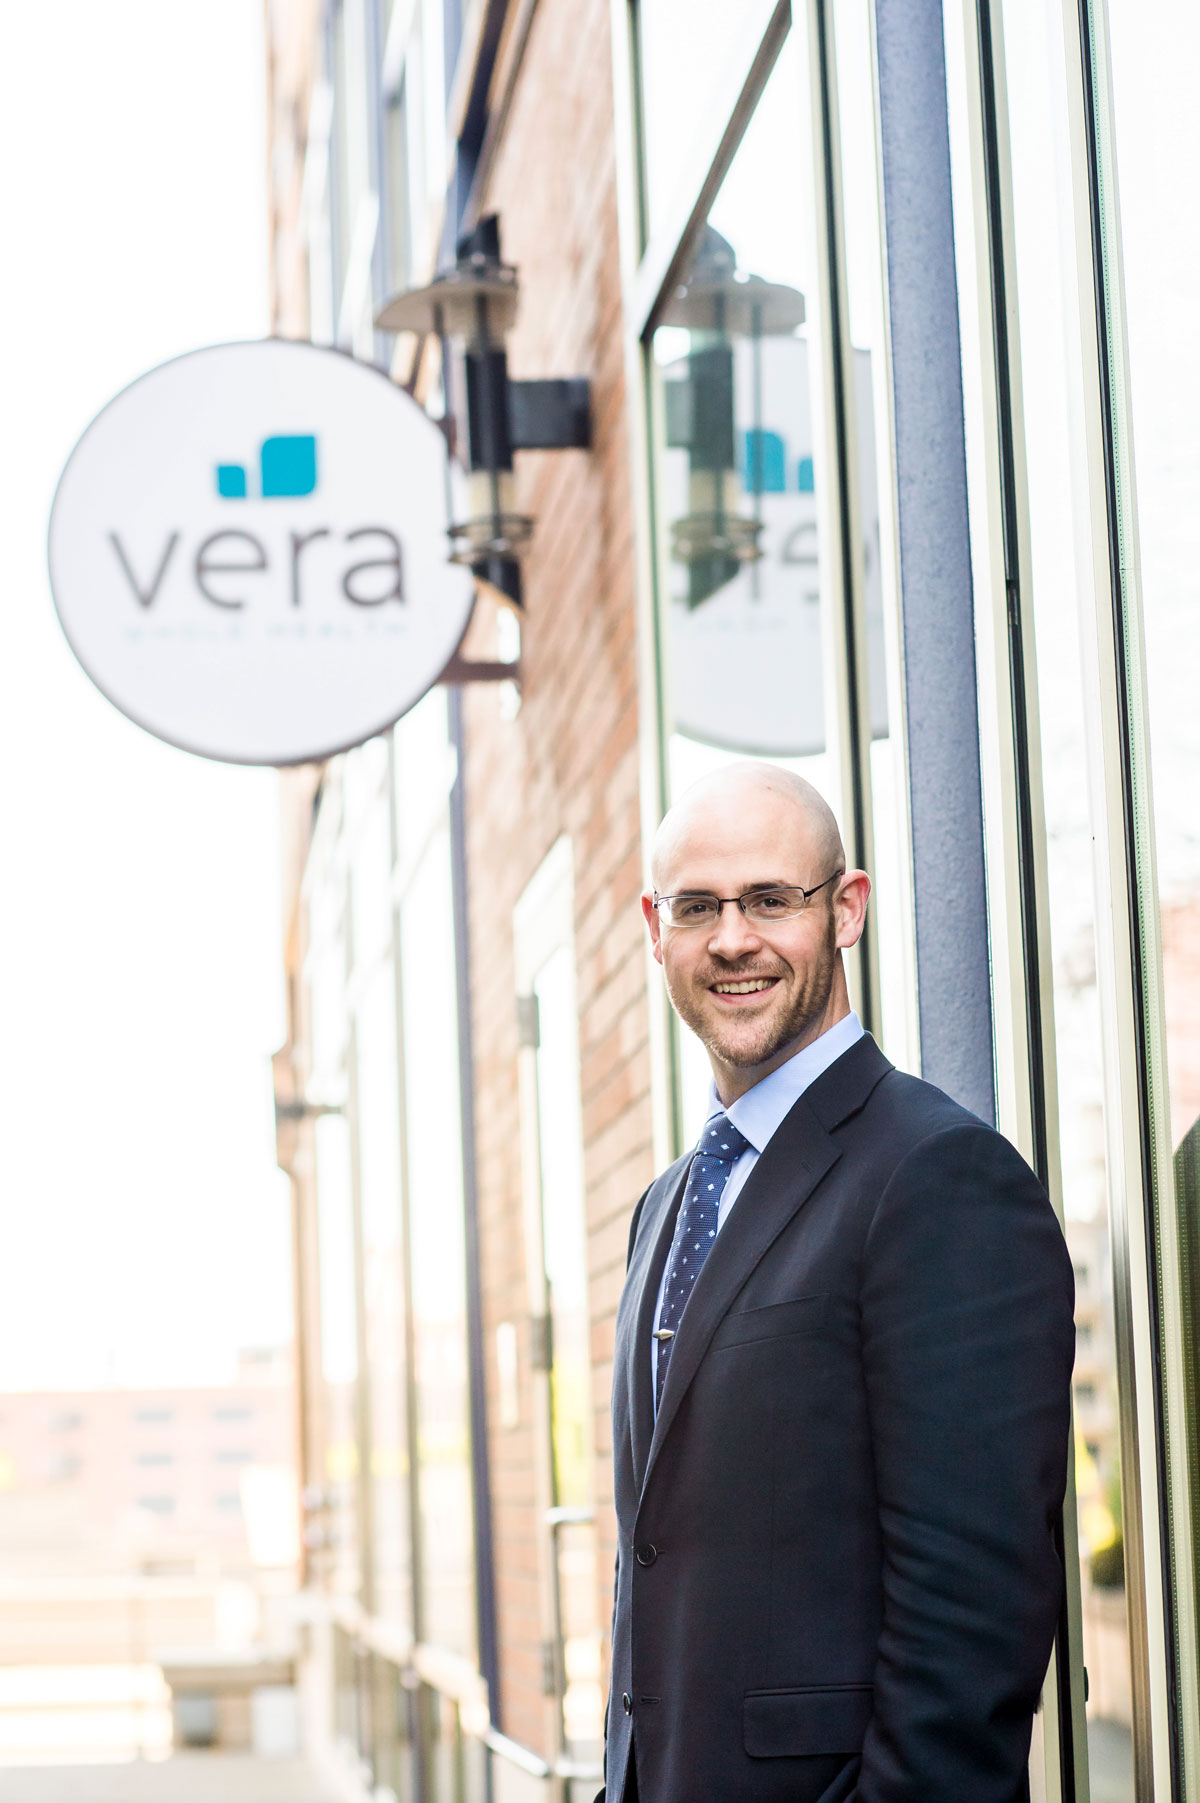 Ryan Schmid, ’07 MBA, smiles in a suit and tie, in front of Vera Whole Health building signage.